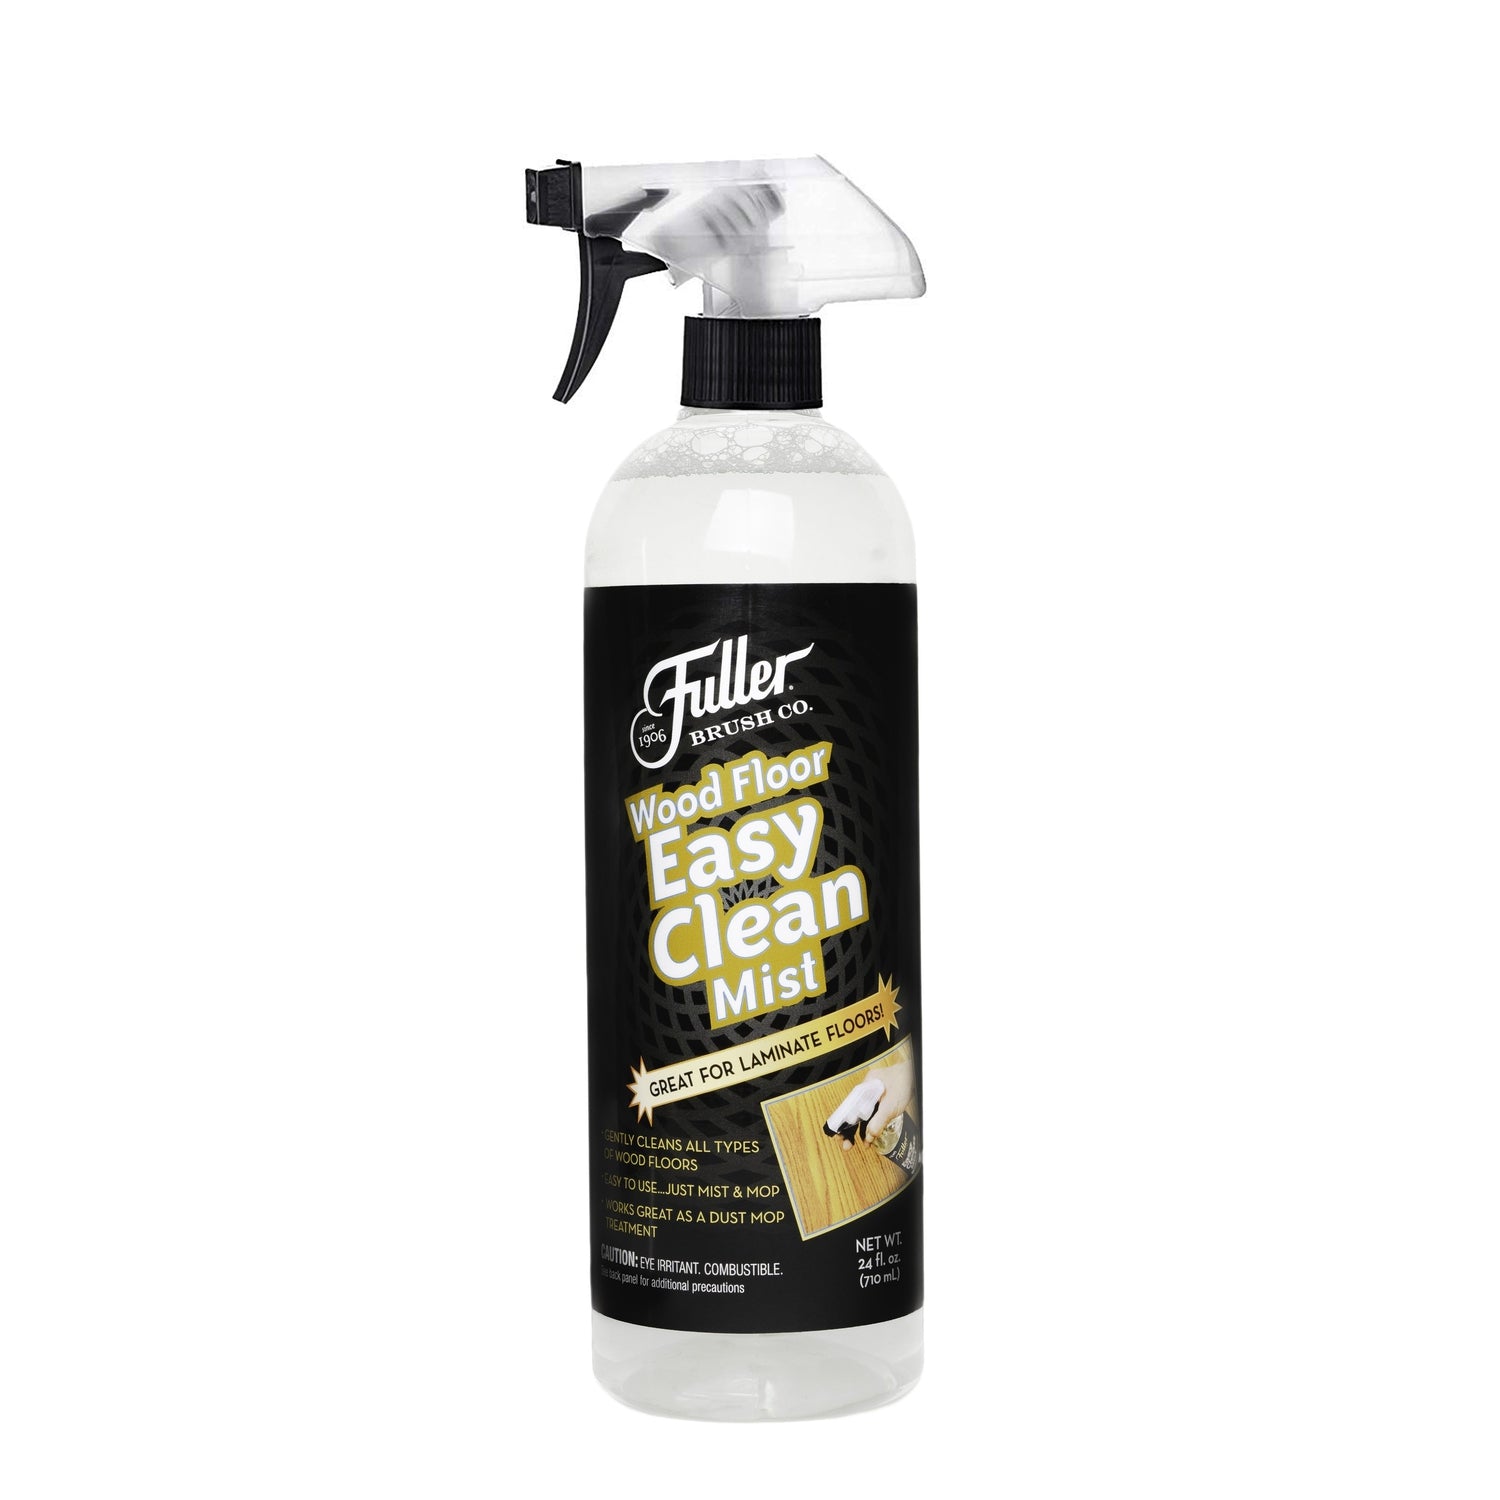 Wood Floor Easy Clean Mist With Sprayer Gentle Cleaner For Laminates and Wood Floors-Cleaning Agents-Fuller Brush Company